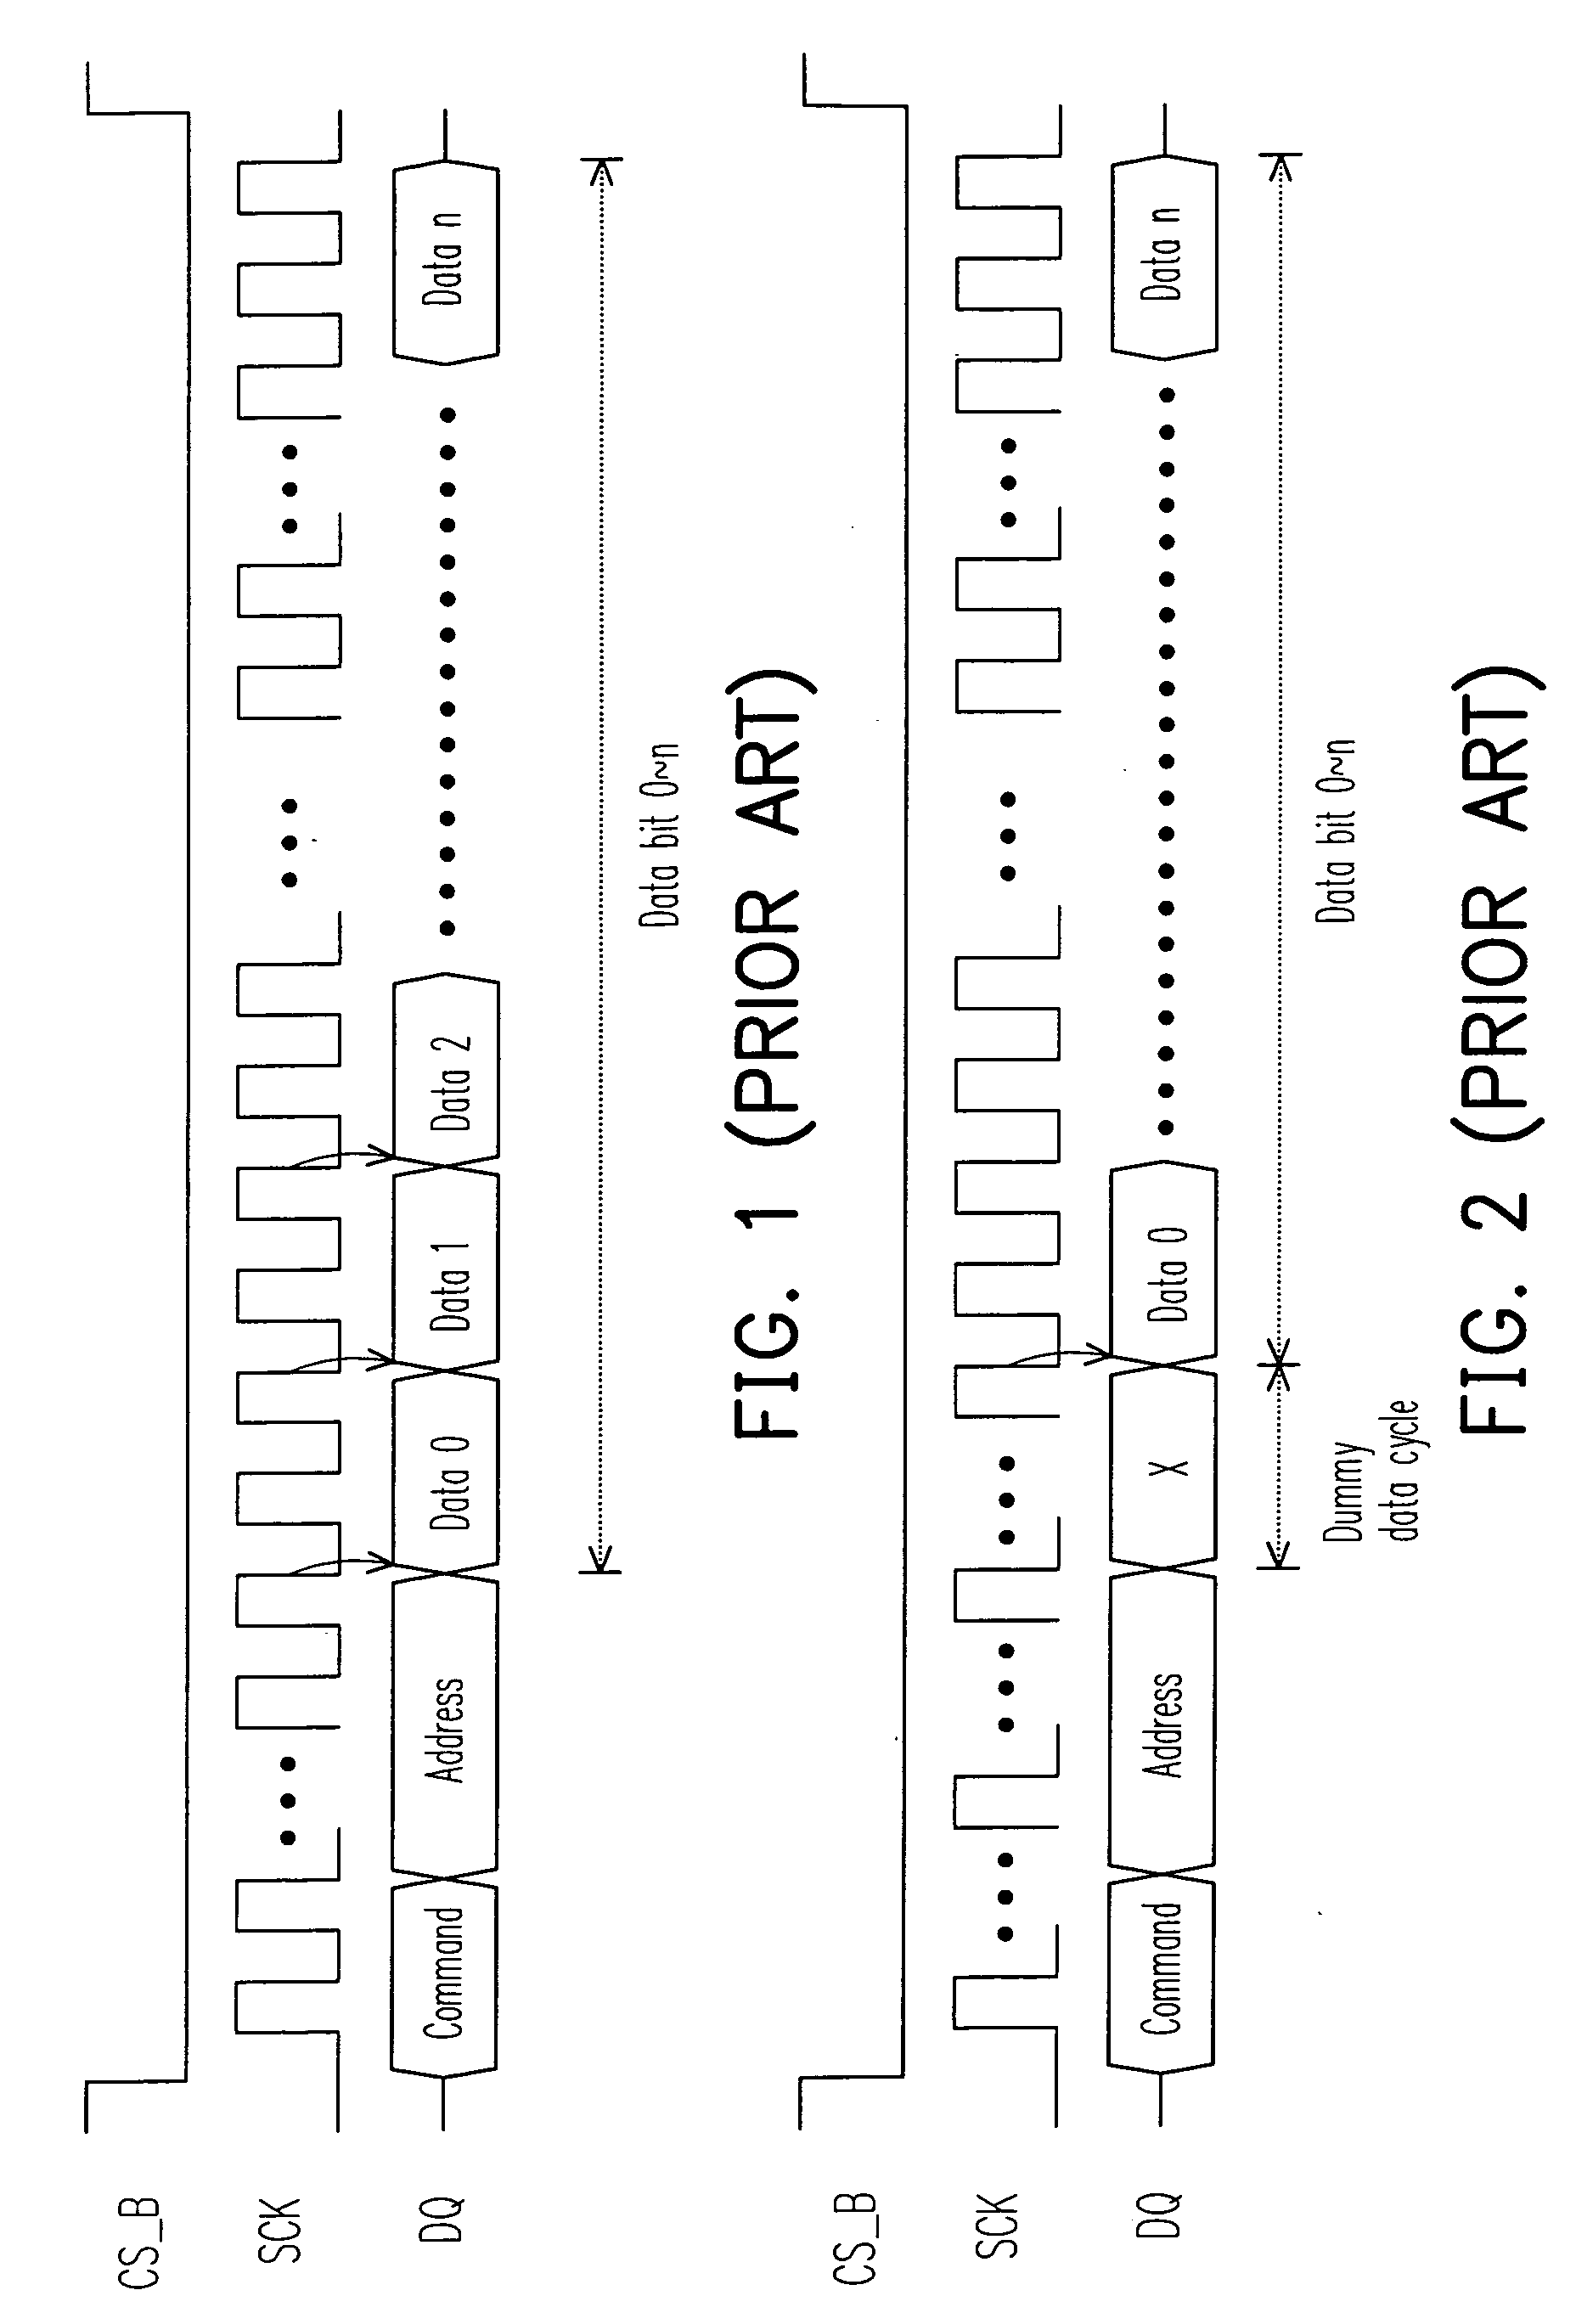 Slave and master of serial peripheral interface, system thereof, and method thereof